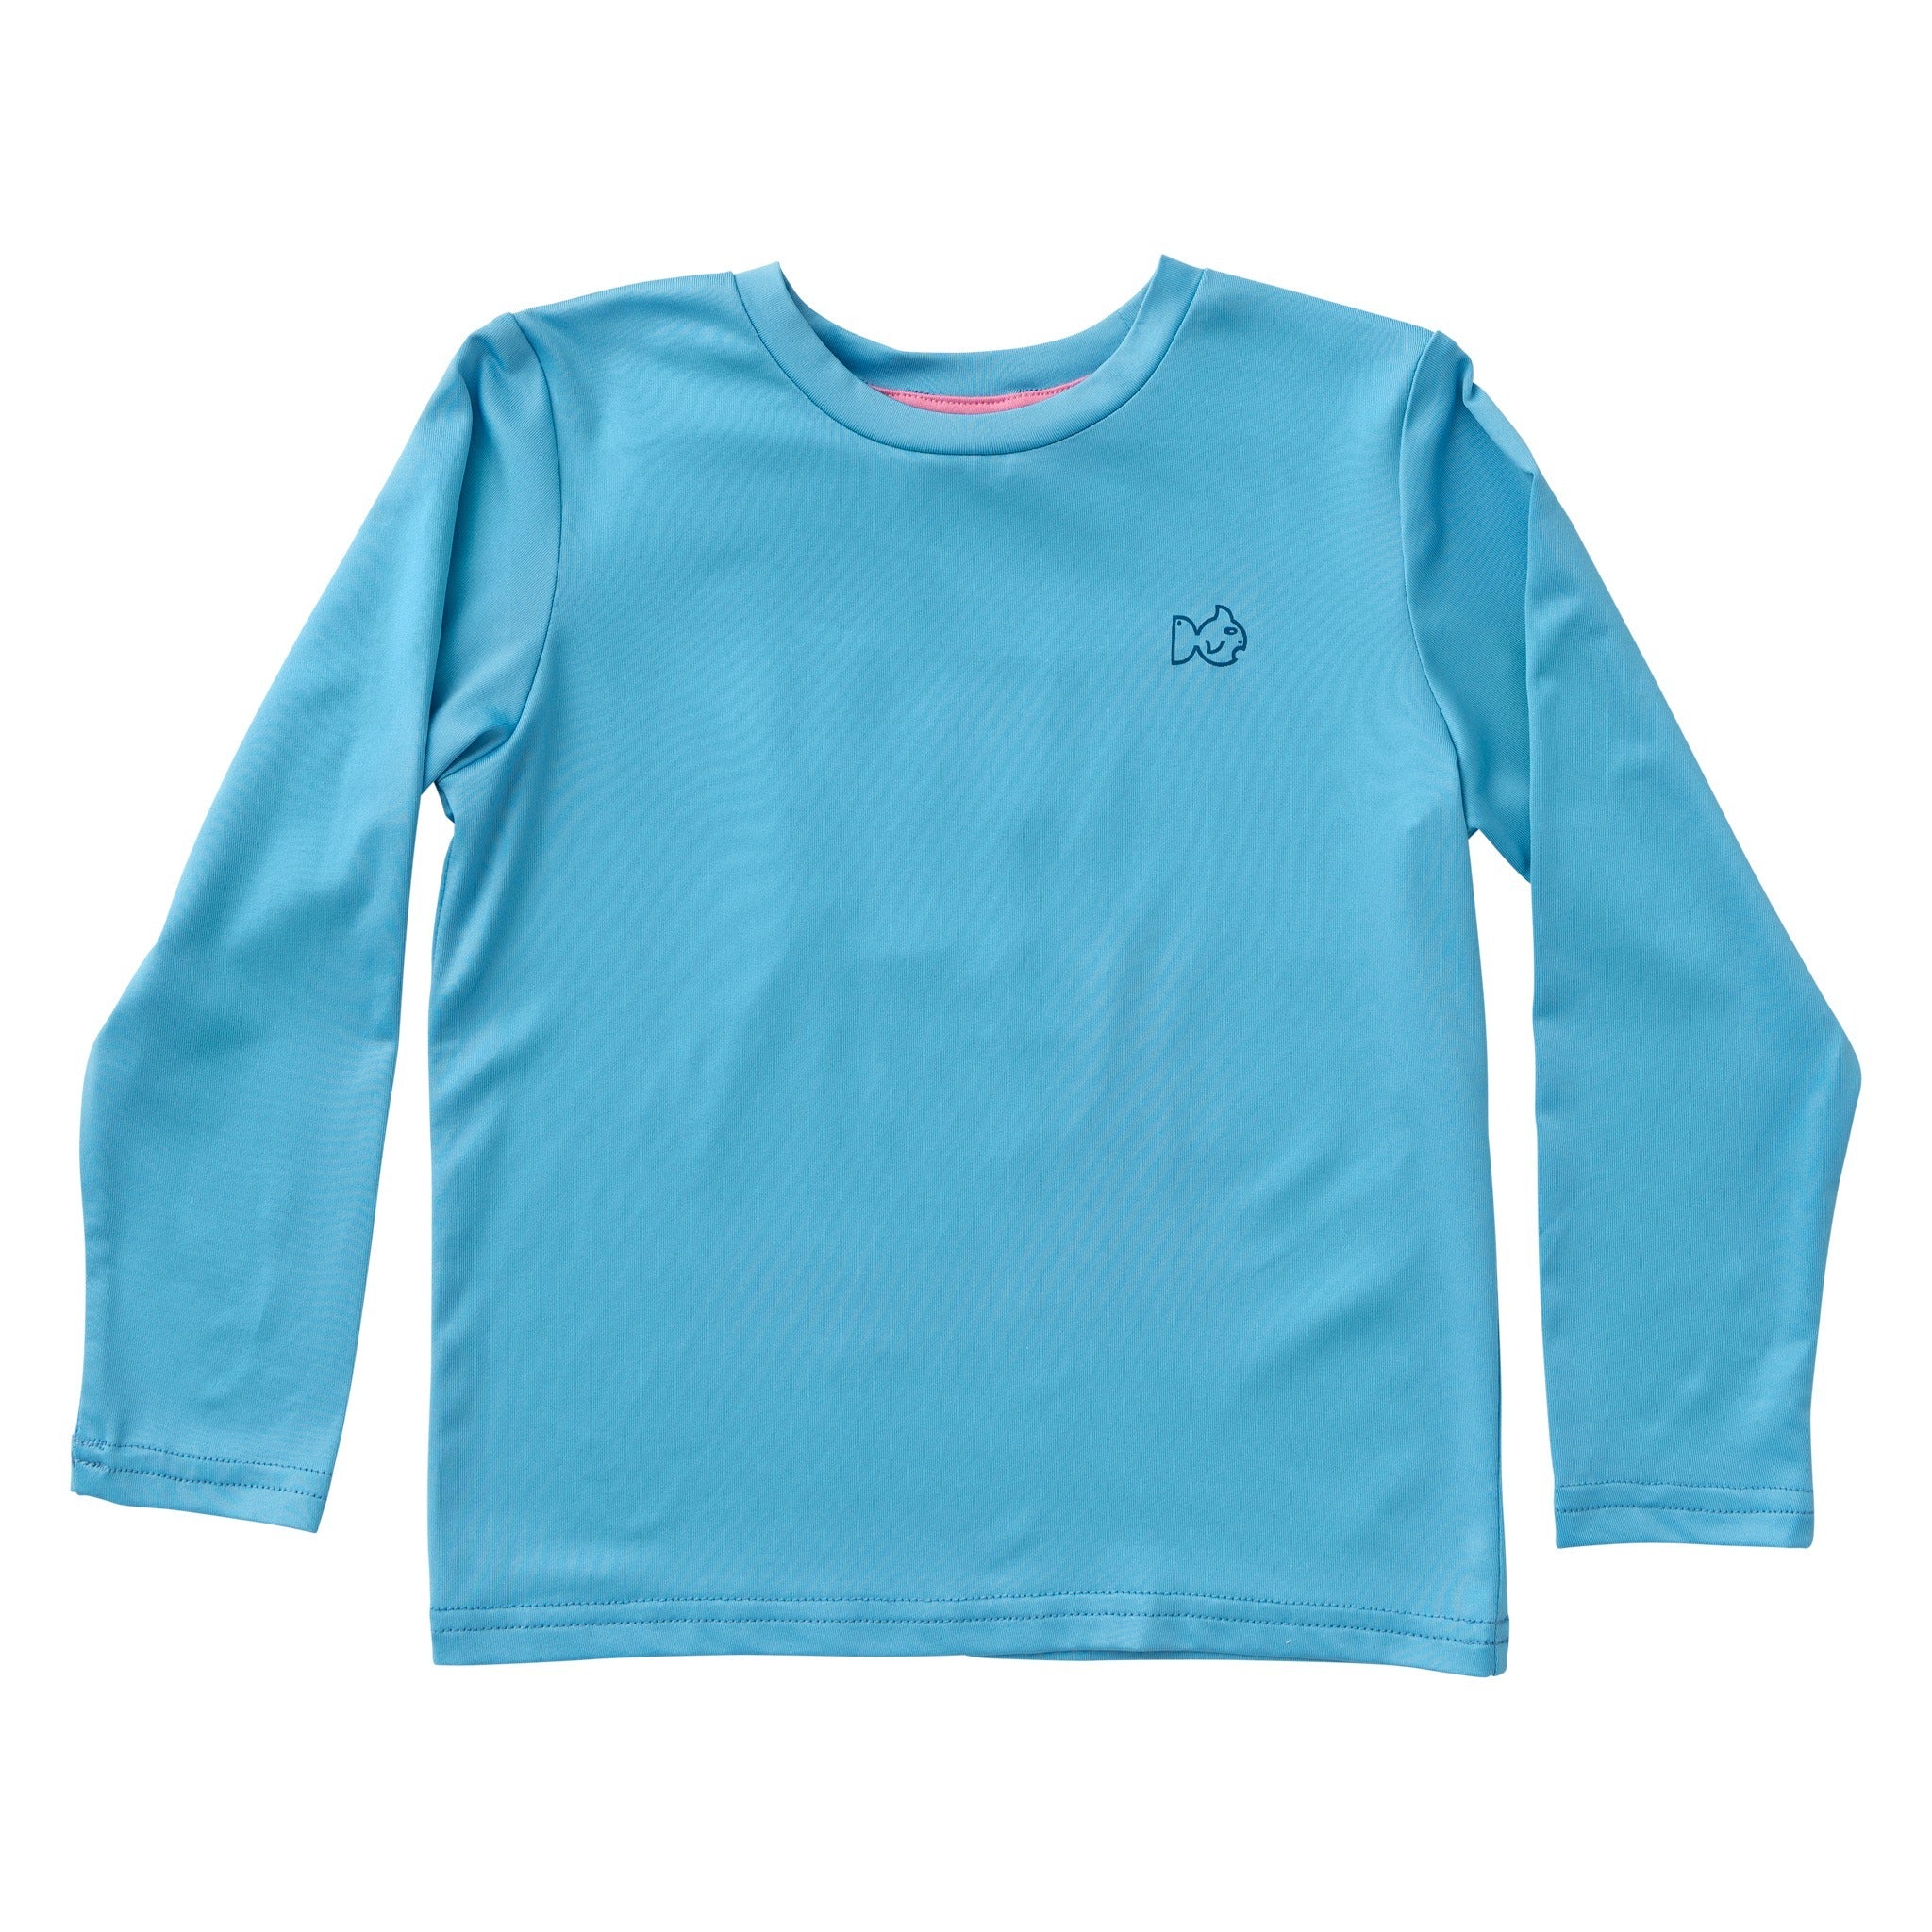 Pro Performance Tee - Ethereal Blue (2T-8/10)